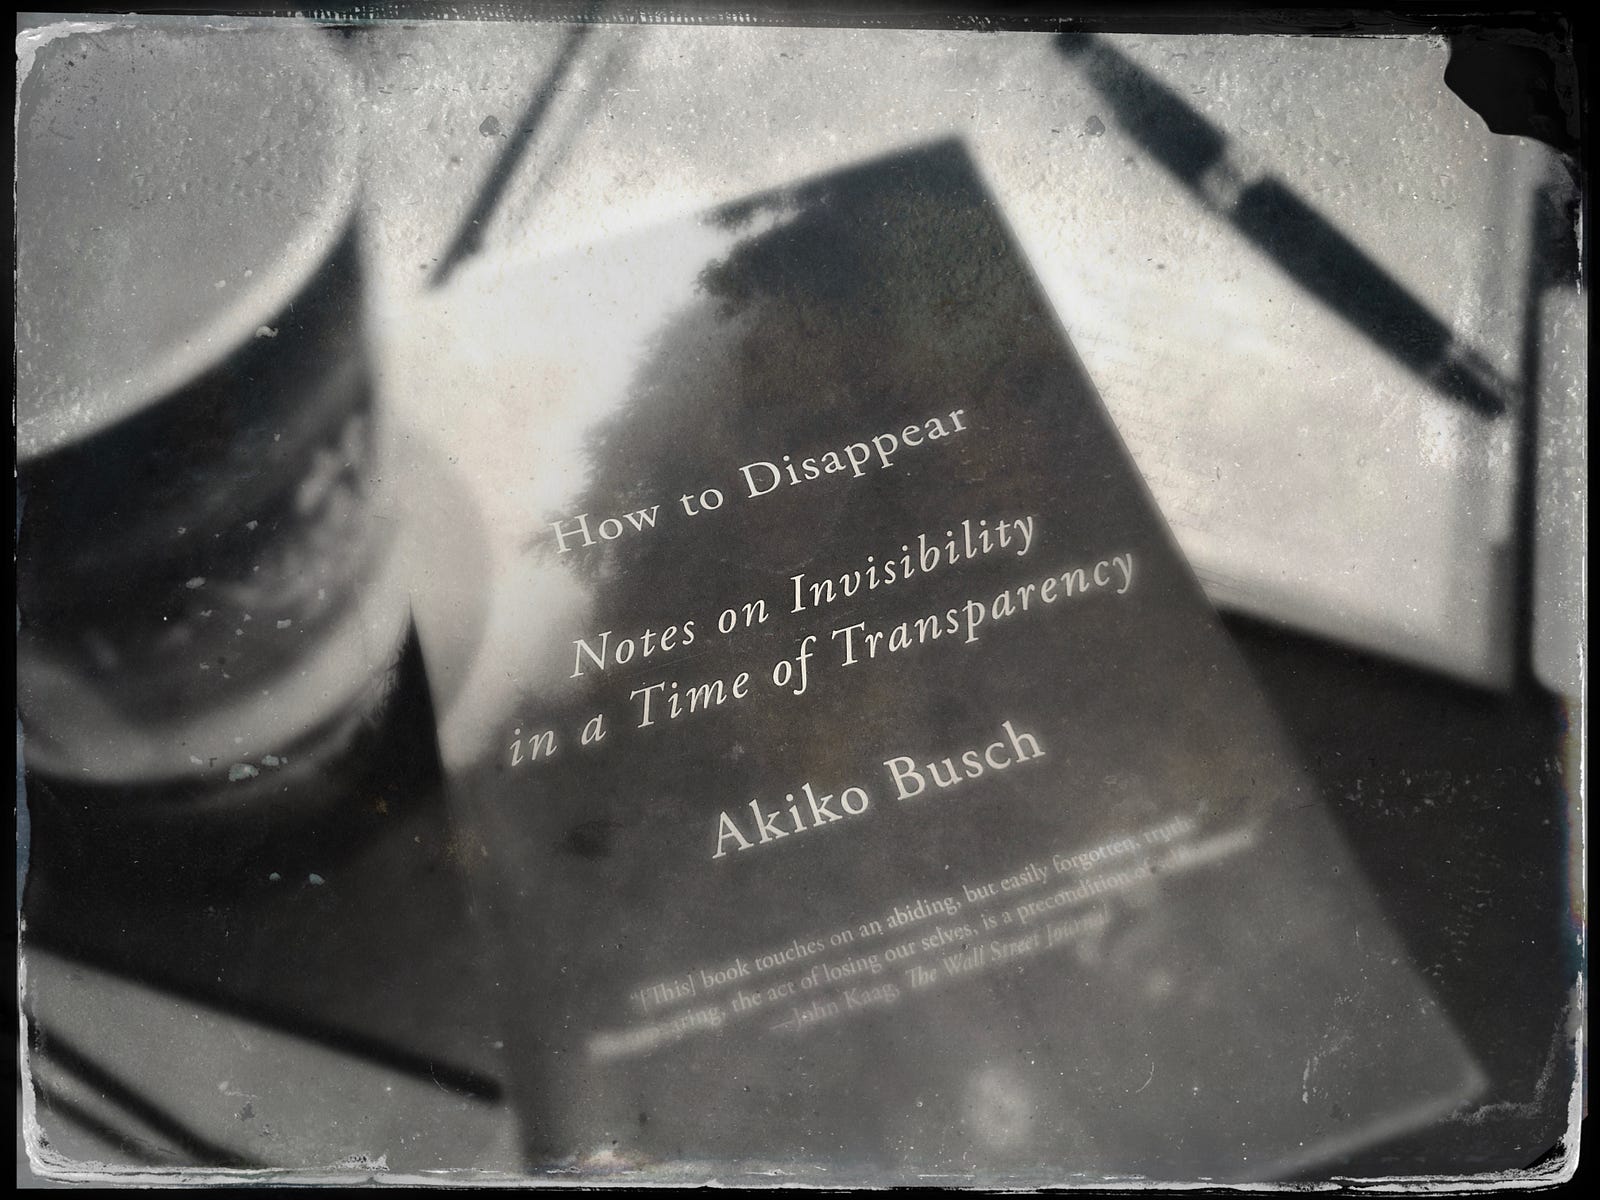 My copy of Akiko Busch’s “How to Disappear.” 📸 : John P. Weiss